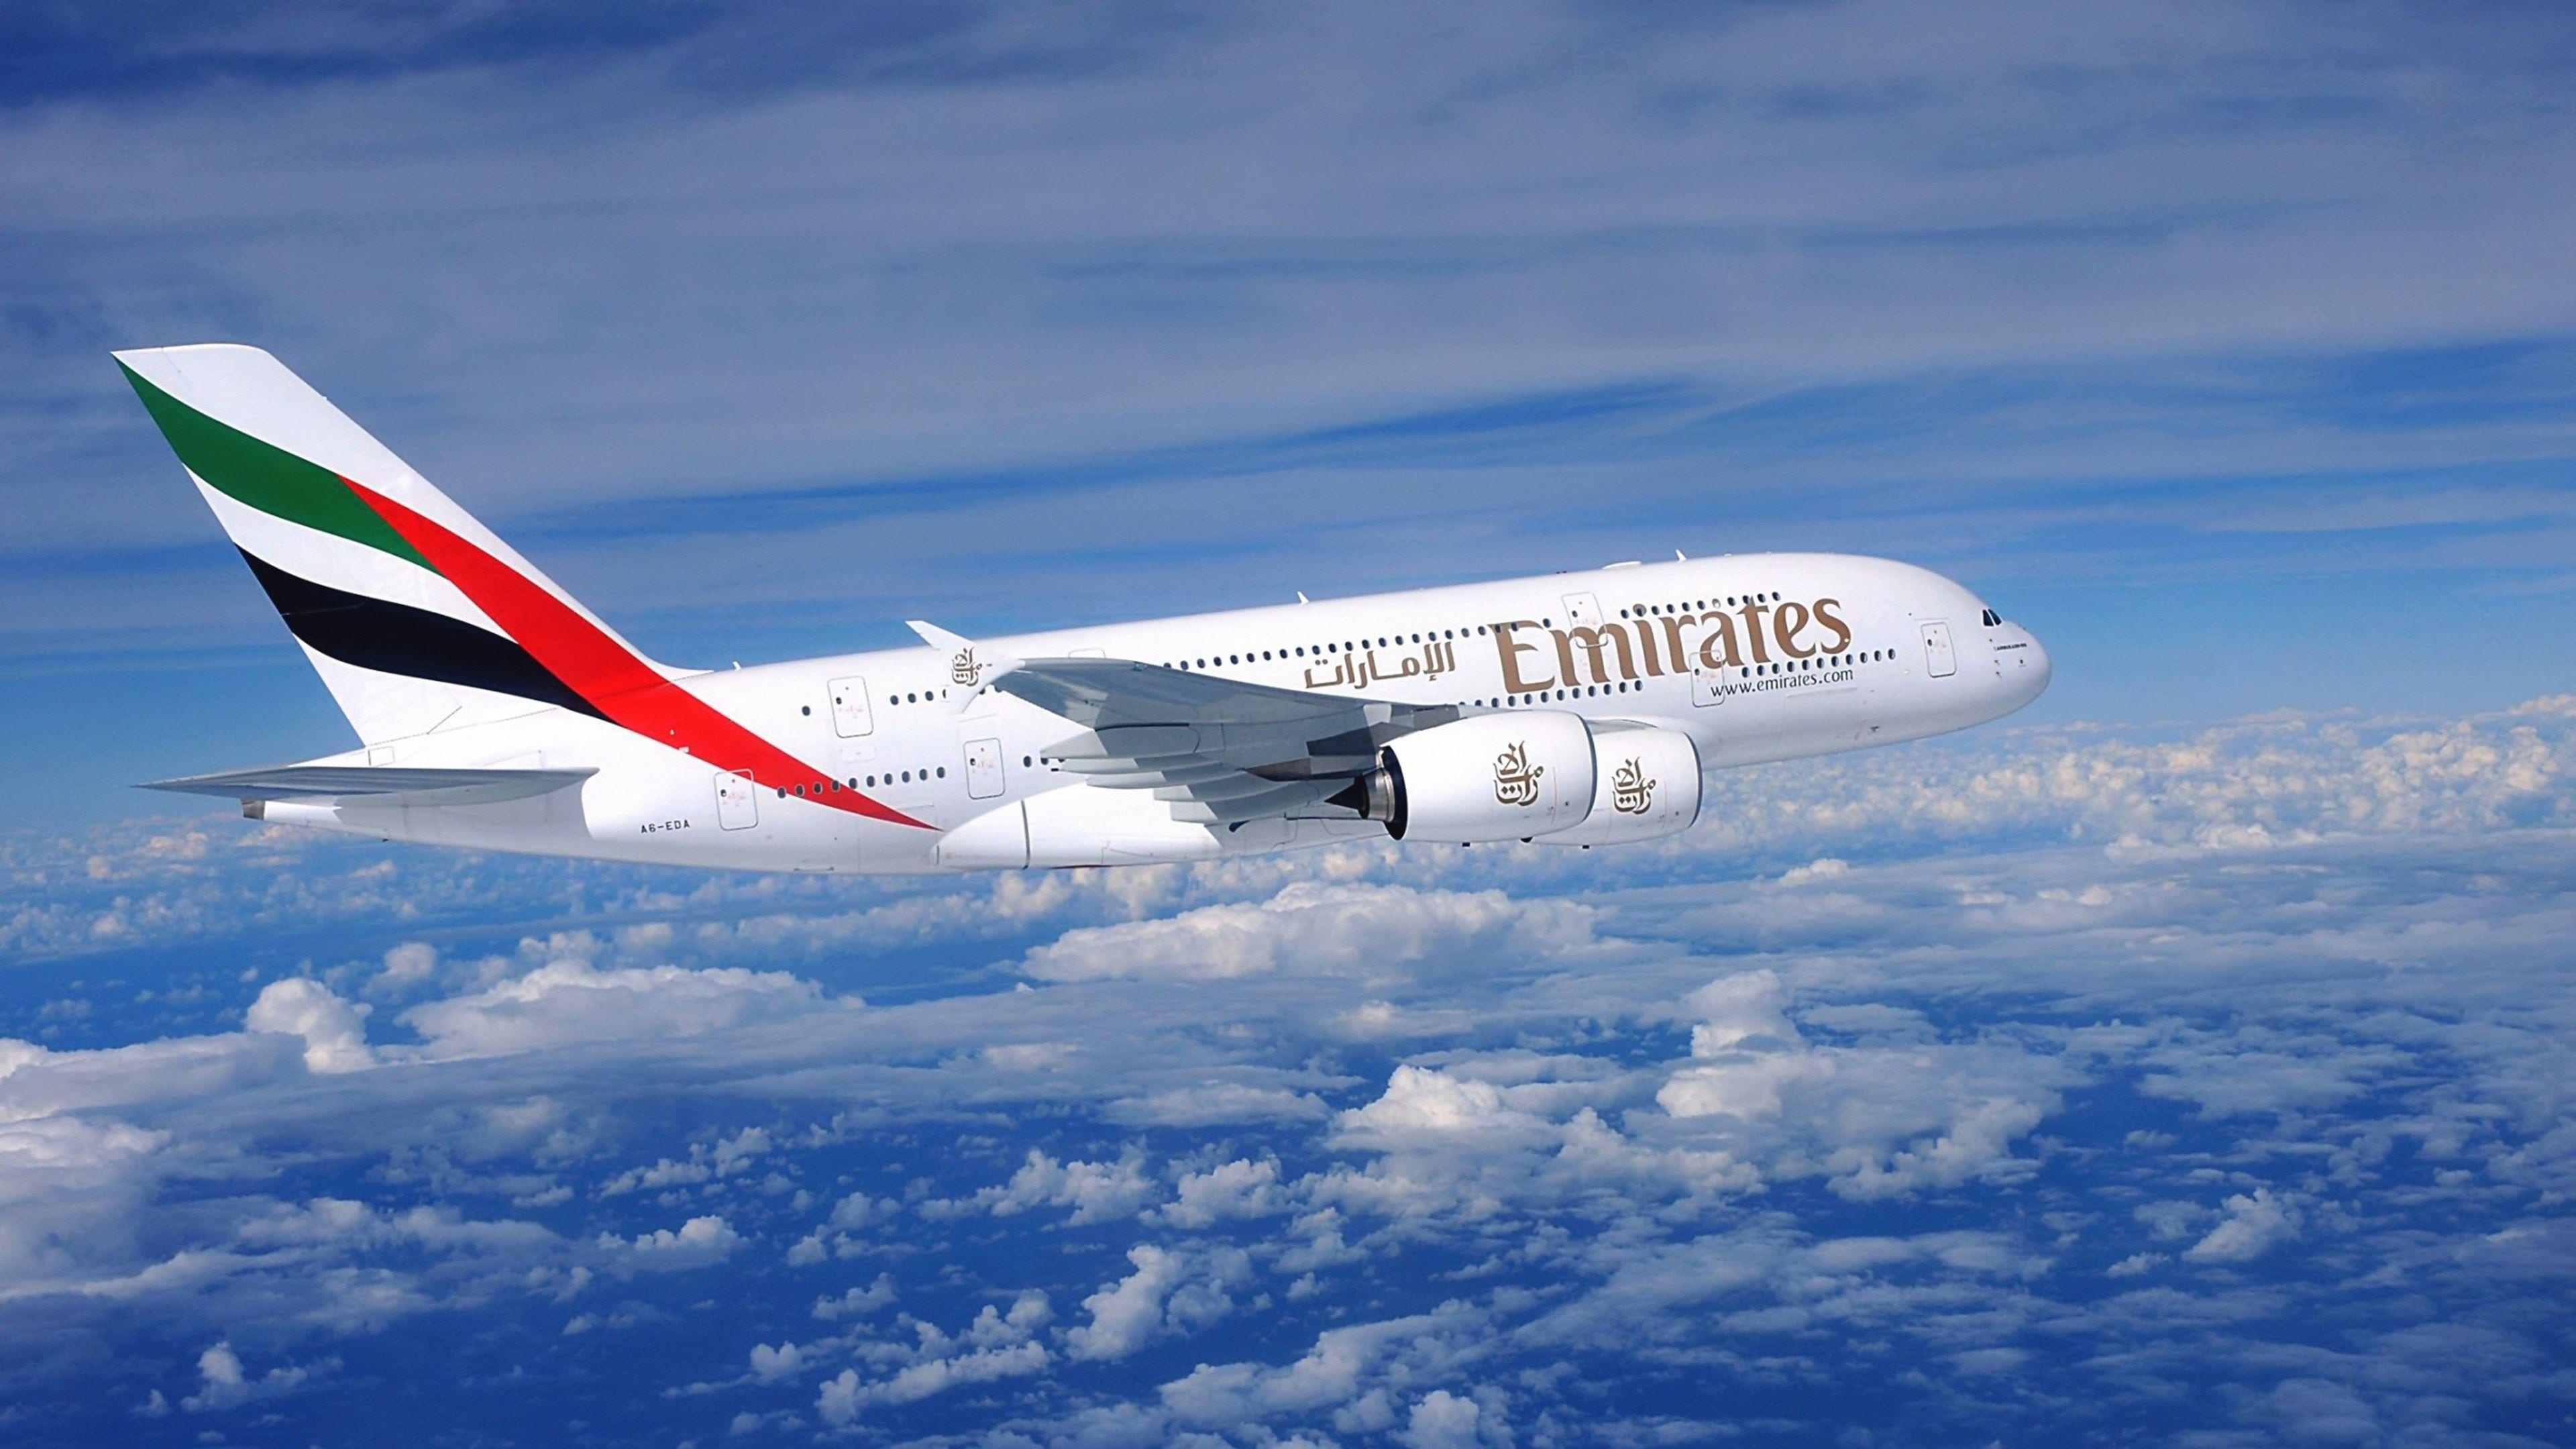 Emirates Airline, A380 wallpapers, Free download, Travels, 3840x2160 4K Desktop